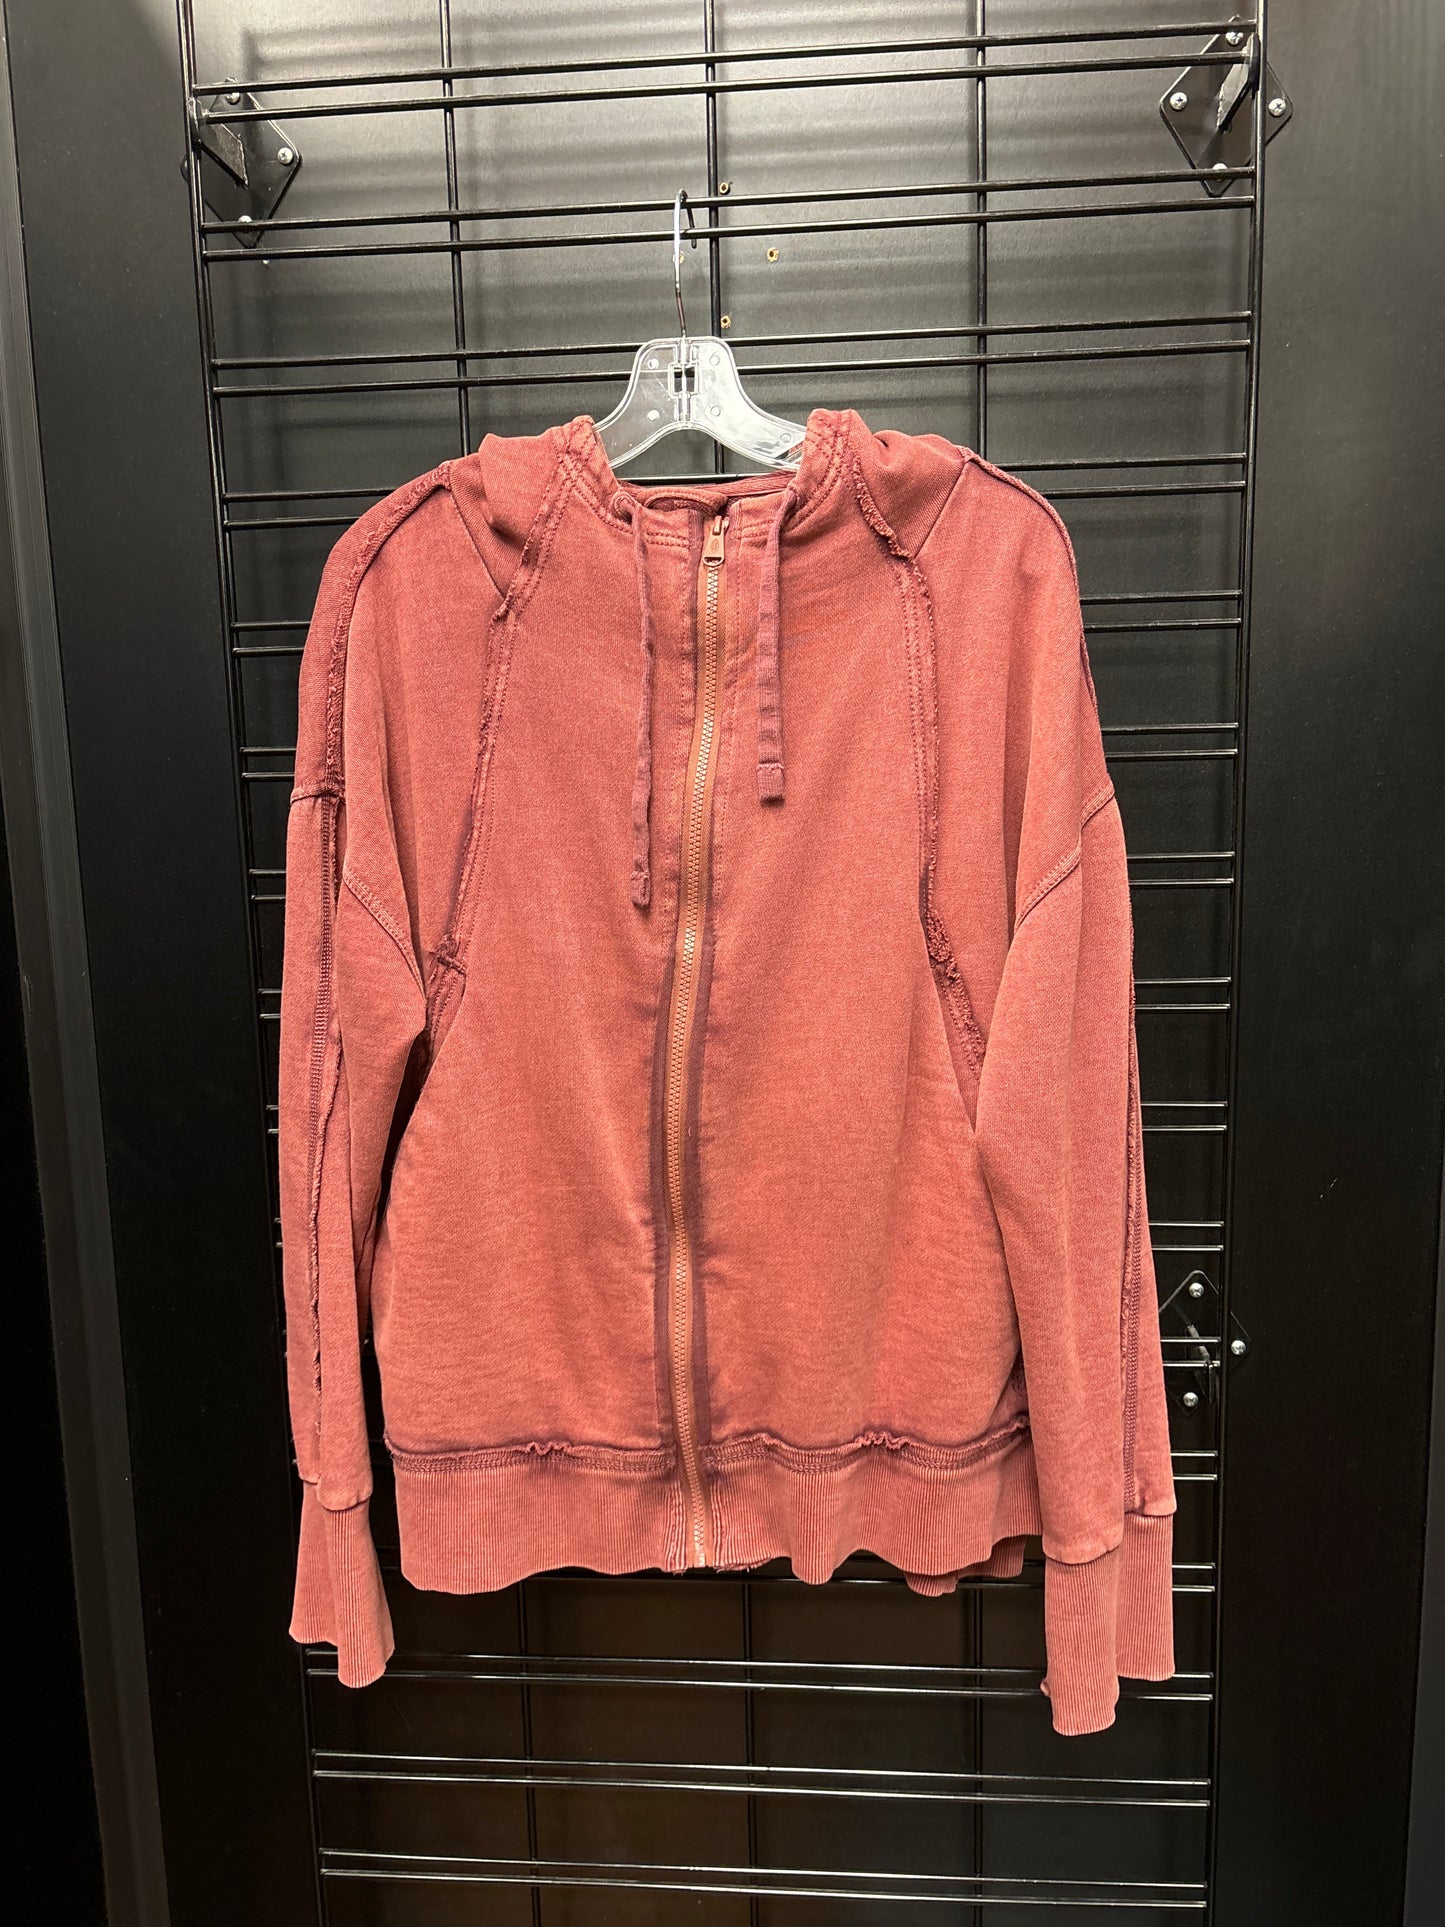 Red Athletic Jacket Free People, Size L